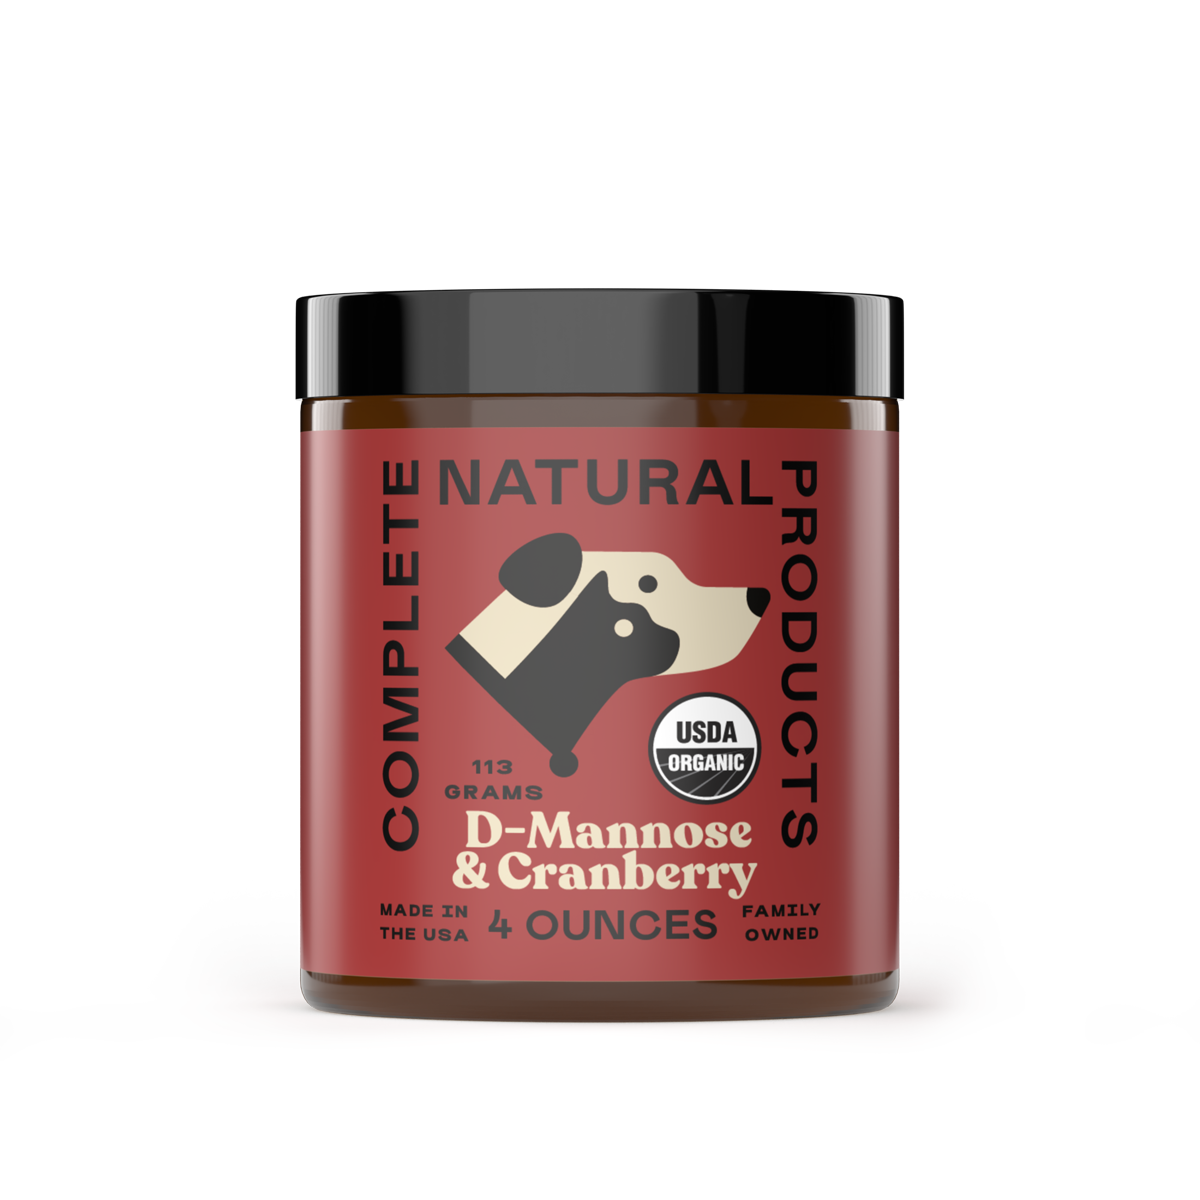 Organic D-Mannose & Cranberry Powder for Dogs, Cats, & Pets